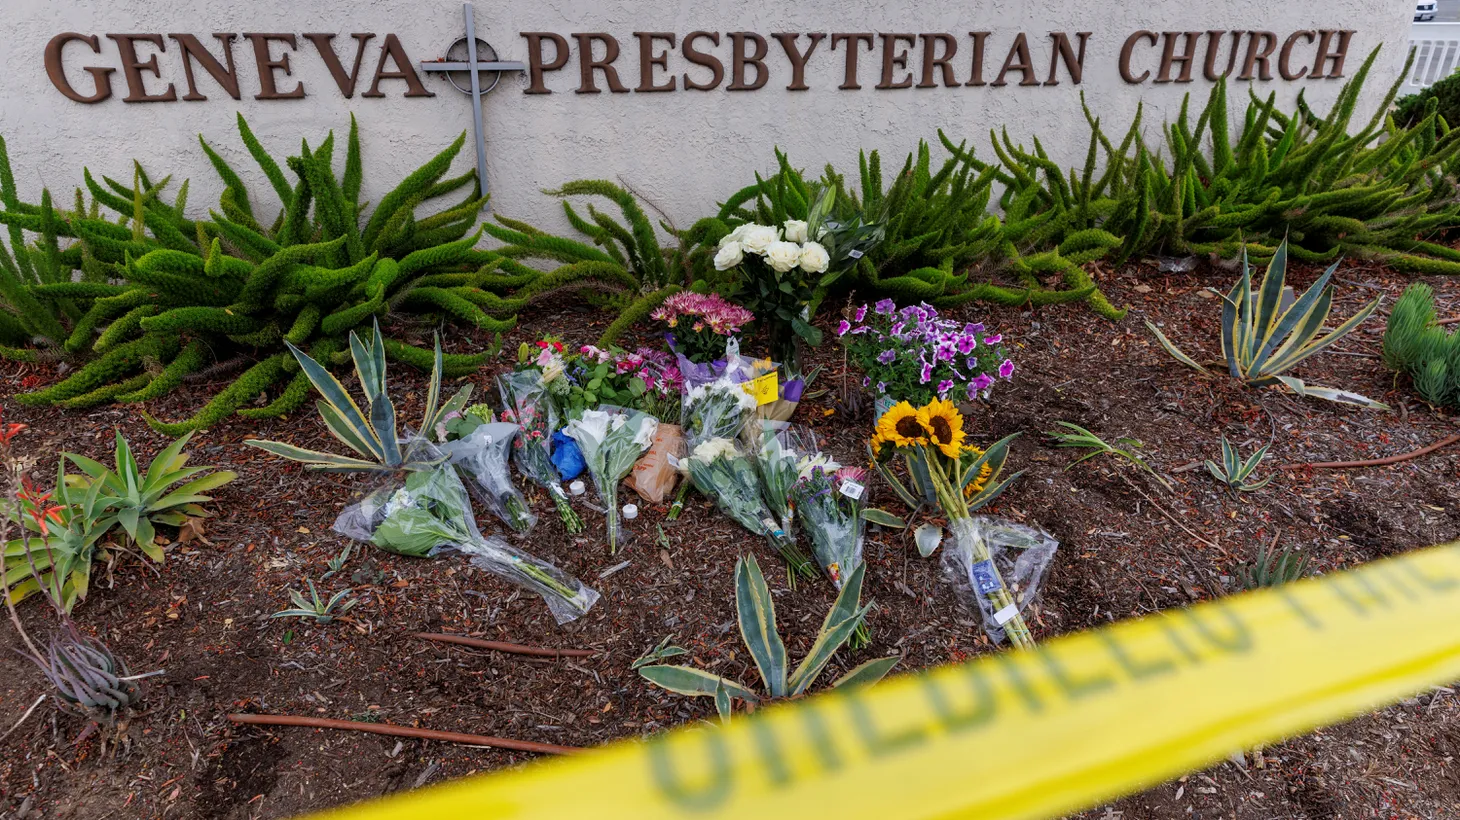 Outside Geneva Presbyterian Church in Laguna Woods, California, a memorial honors the people who were killed and injured during a shooting on May 15, 2022.